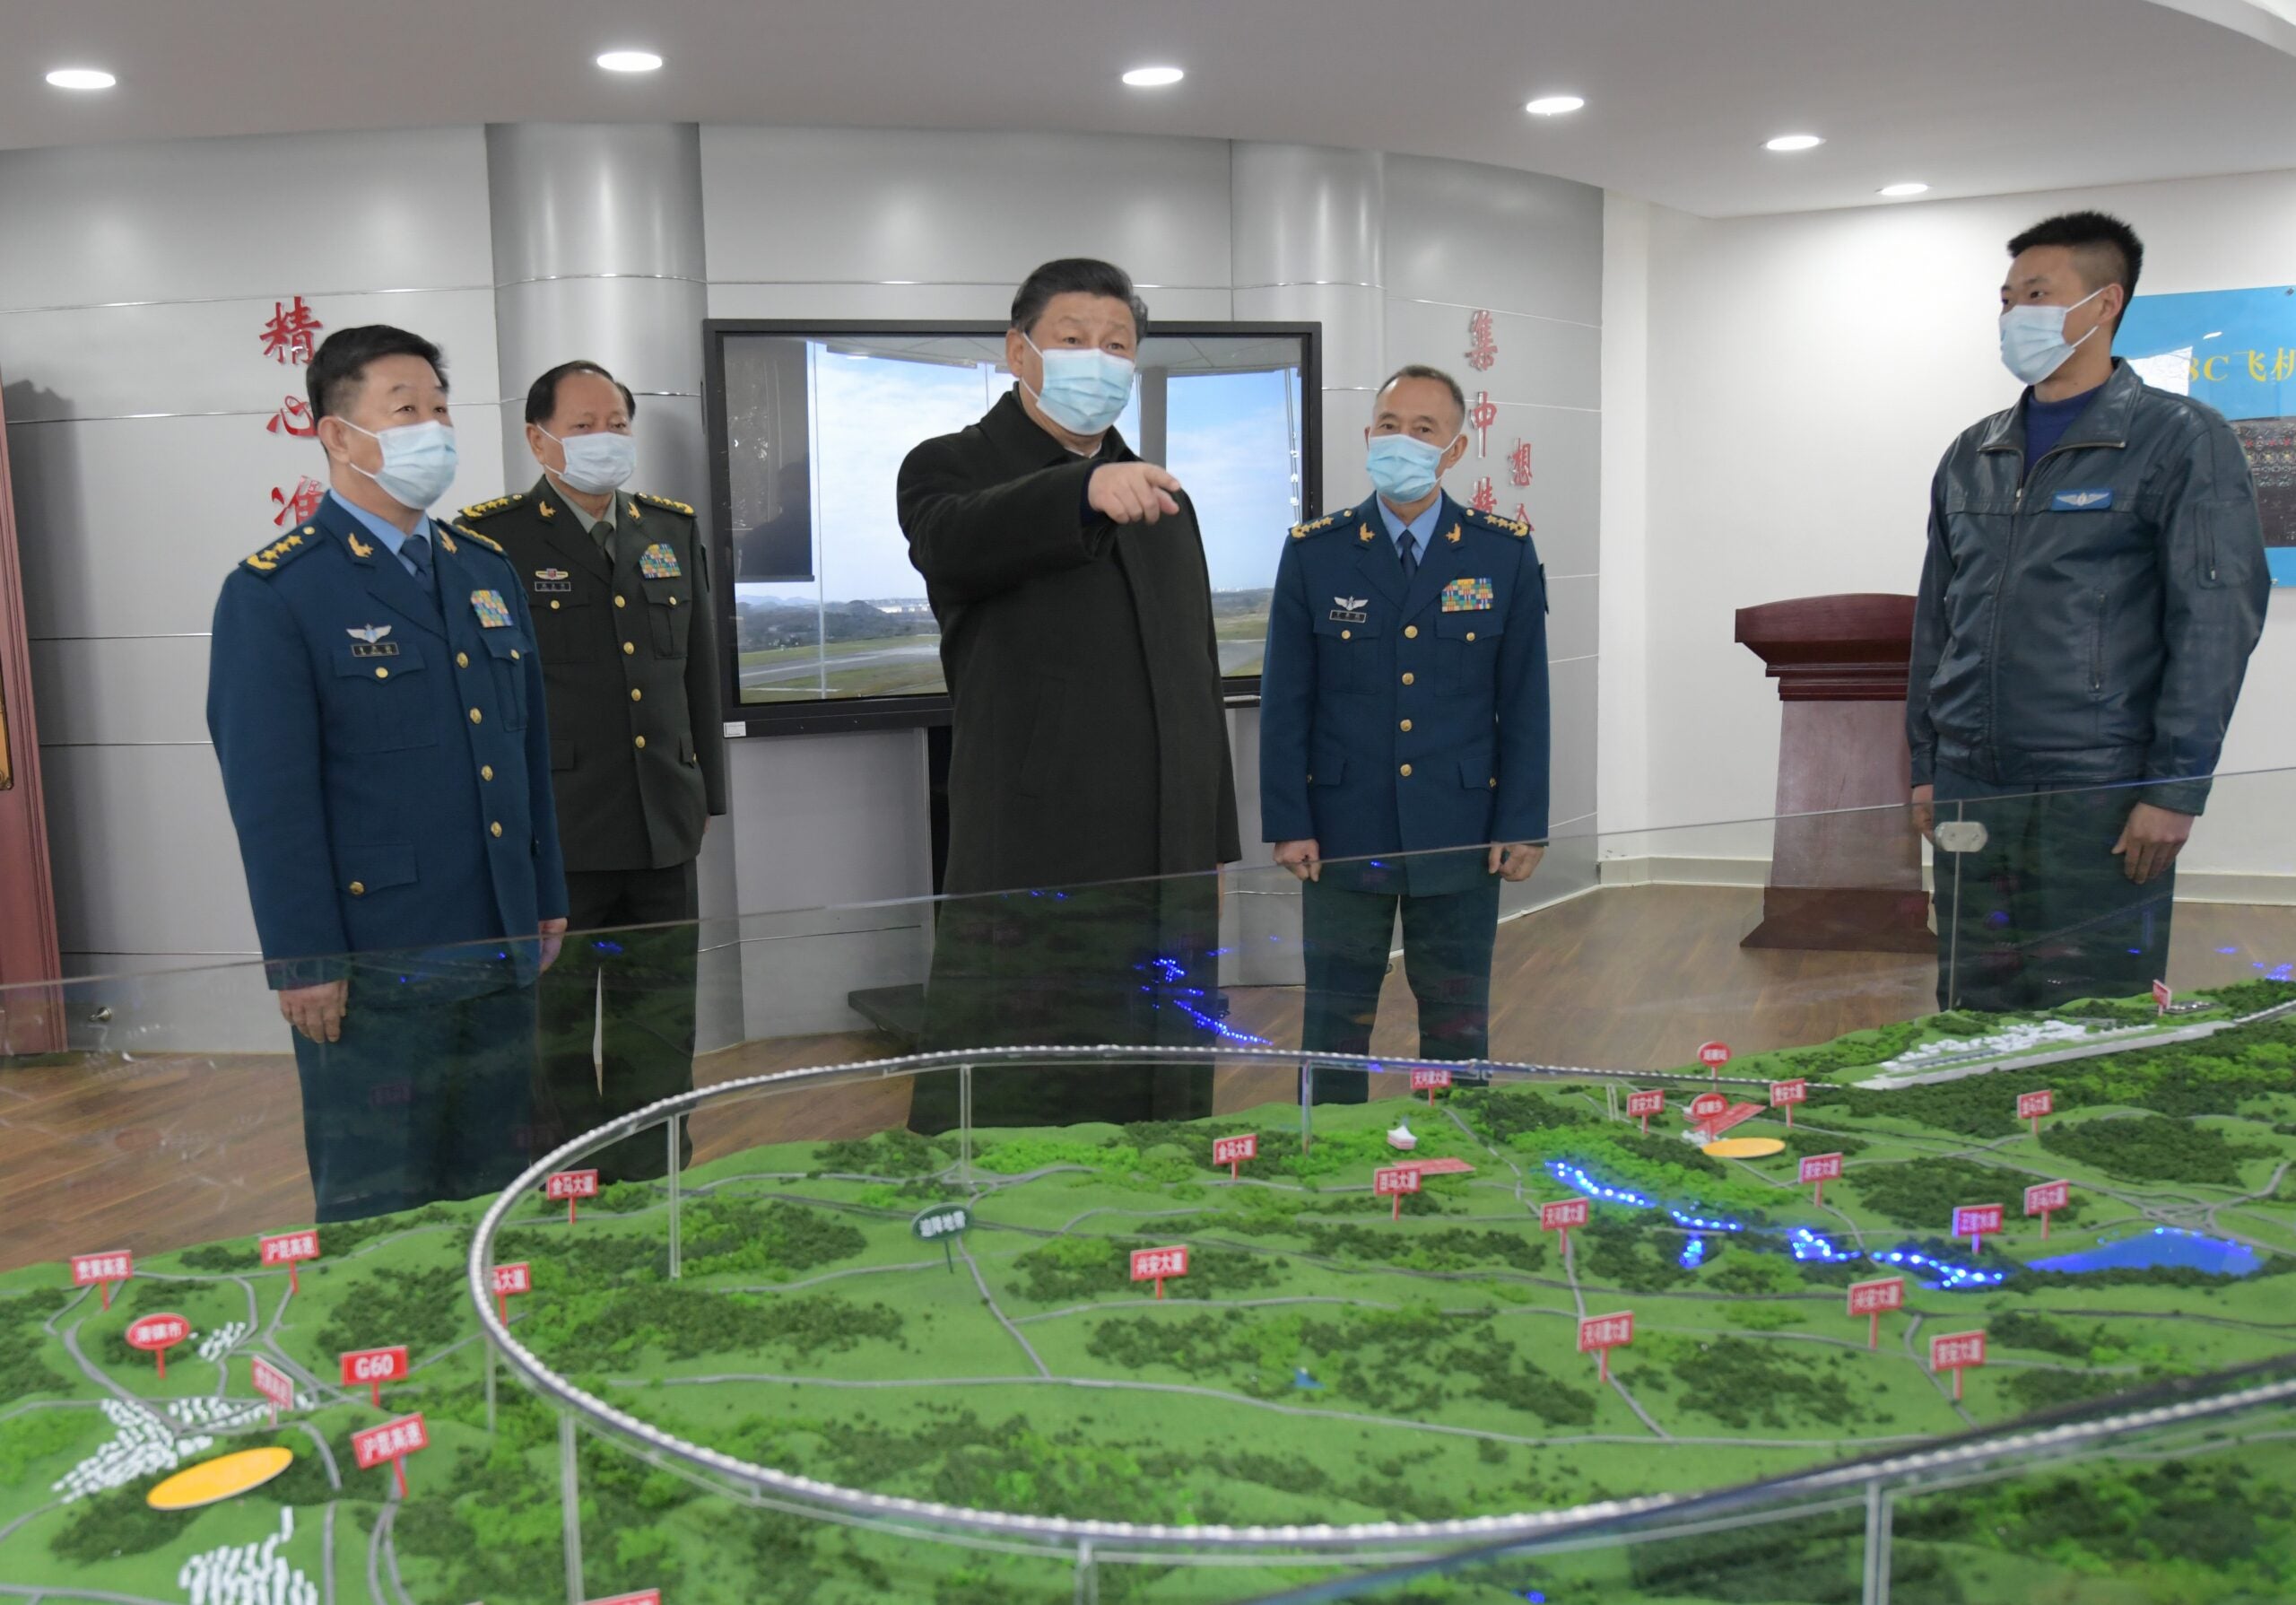 GUIYANG, Feb. 4, 2021 -- Chinese President Xi Jinping, also general secretary of the Communist Party of China CPC Central Committee and chairman of the Central Military Commission CMC, learns about the education and training of soldiers and officers on Feb. 4, 2021.
  Xi on Thursday inspected an aviation division of the Air Force stationed in southwestern Guizhou Province ahead of the Spring Festival, or the Chinese Lunar New Year.
  Xi extended New Year greetings to all soldiers and officers of the People's Liberation Army, armed police force, civilian personnel in the military, militia and reserve forces, on behalf of the CPC Central Committee and the CMC. (Photo by Li Gang/Xinhua via Getty) (Xinhua/Li Gang via Getty Images)